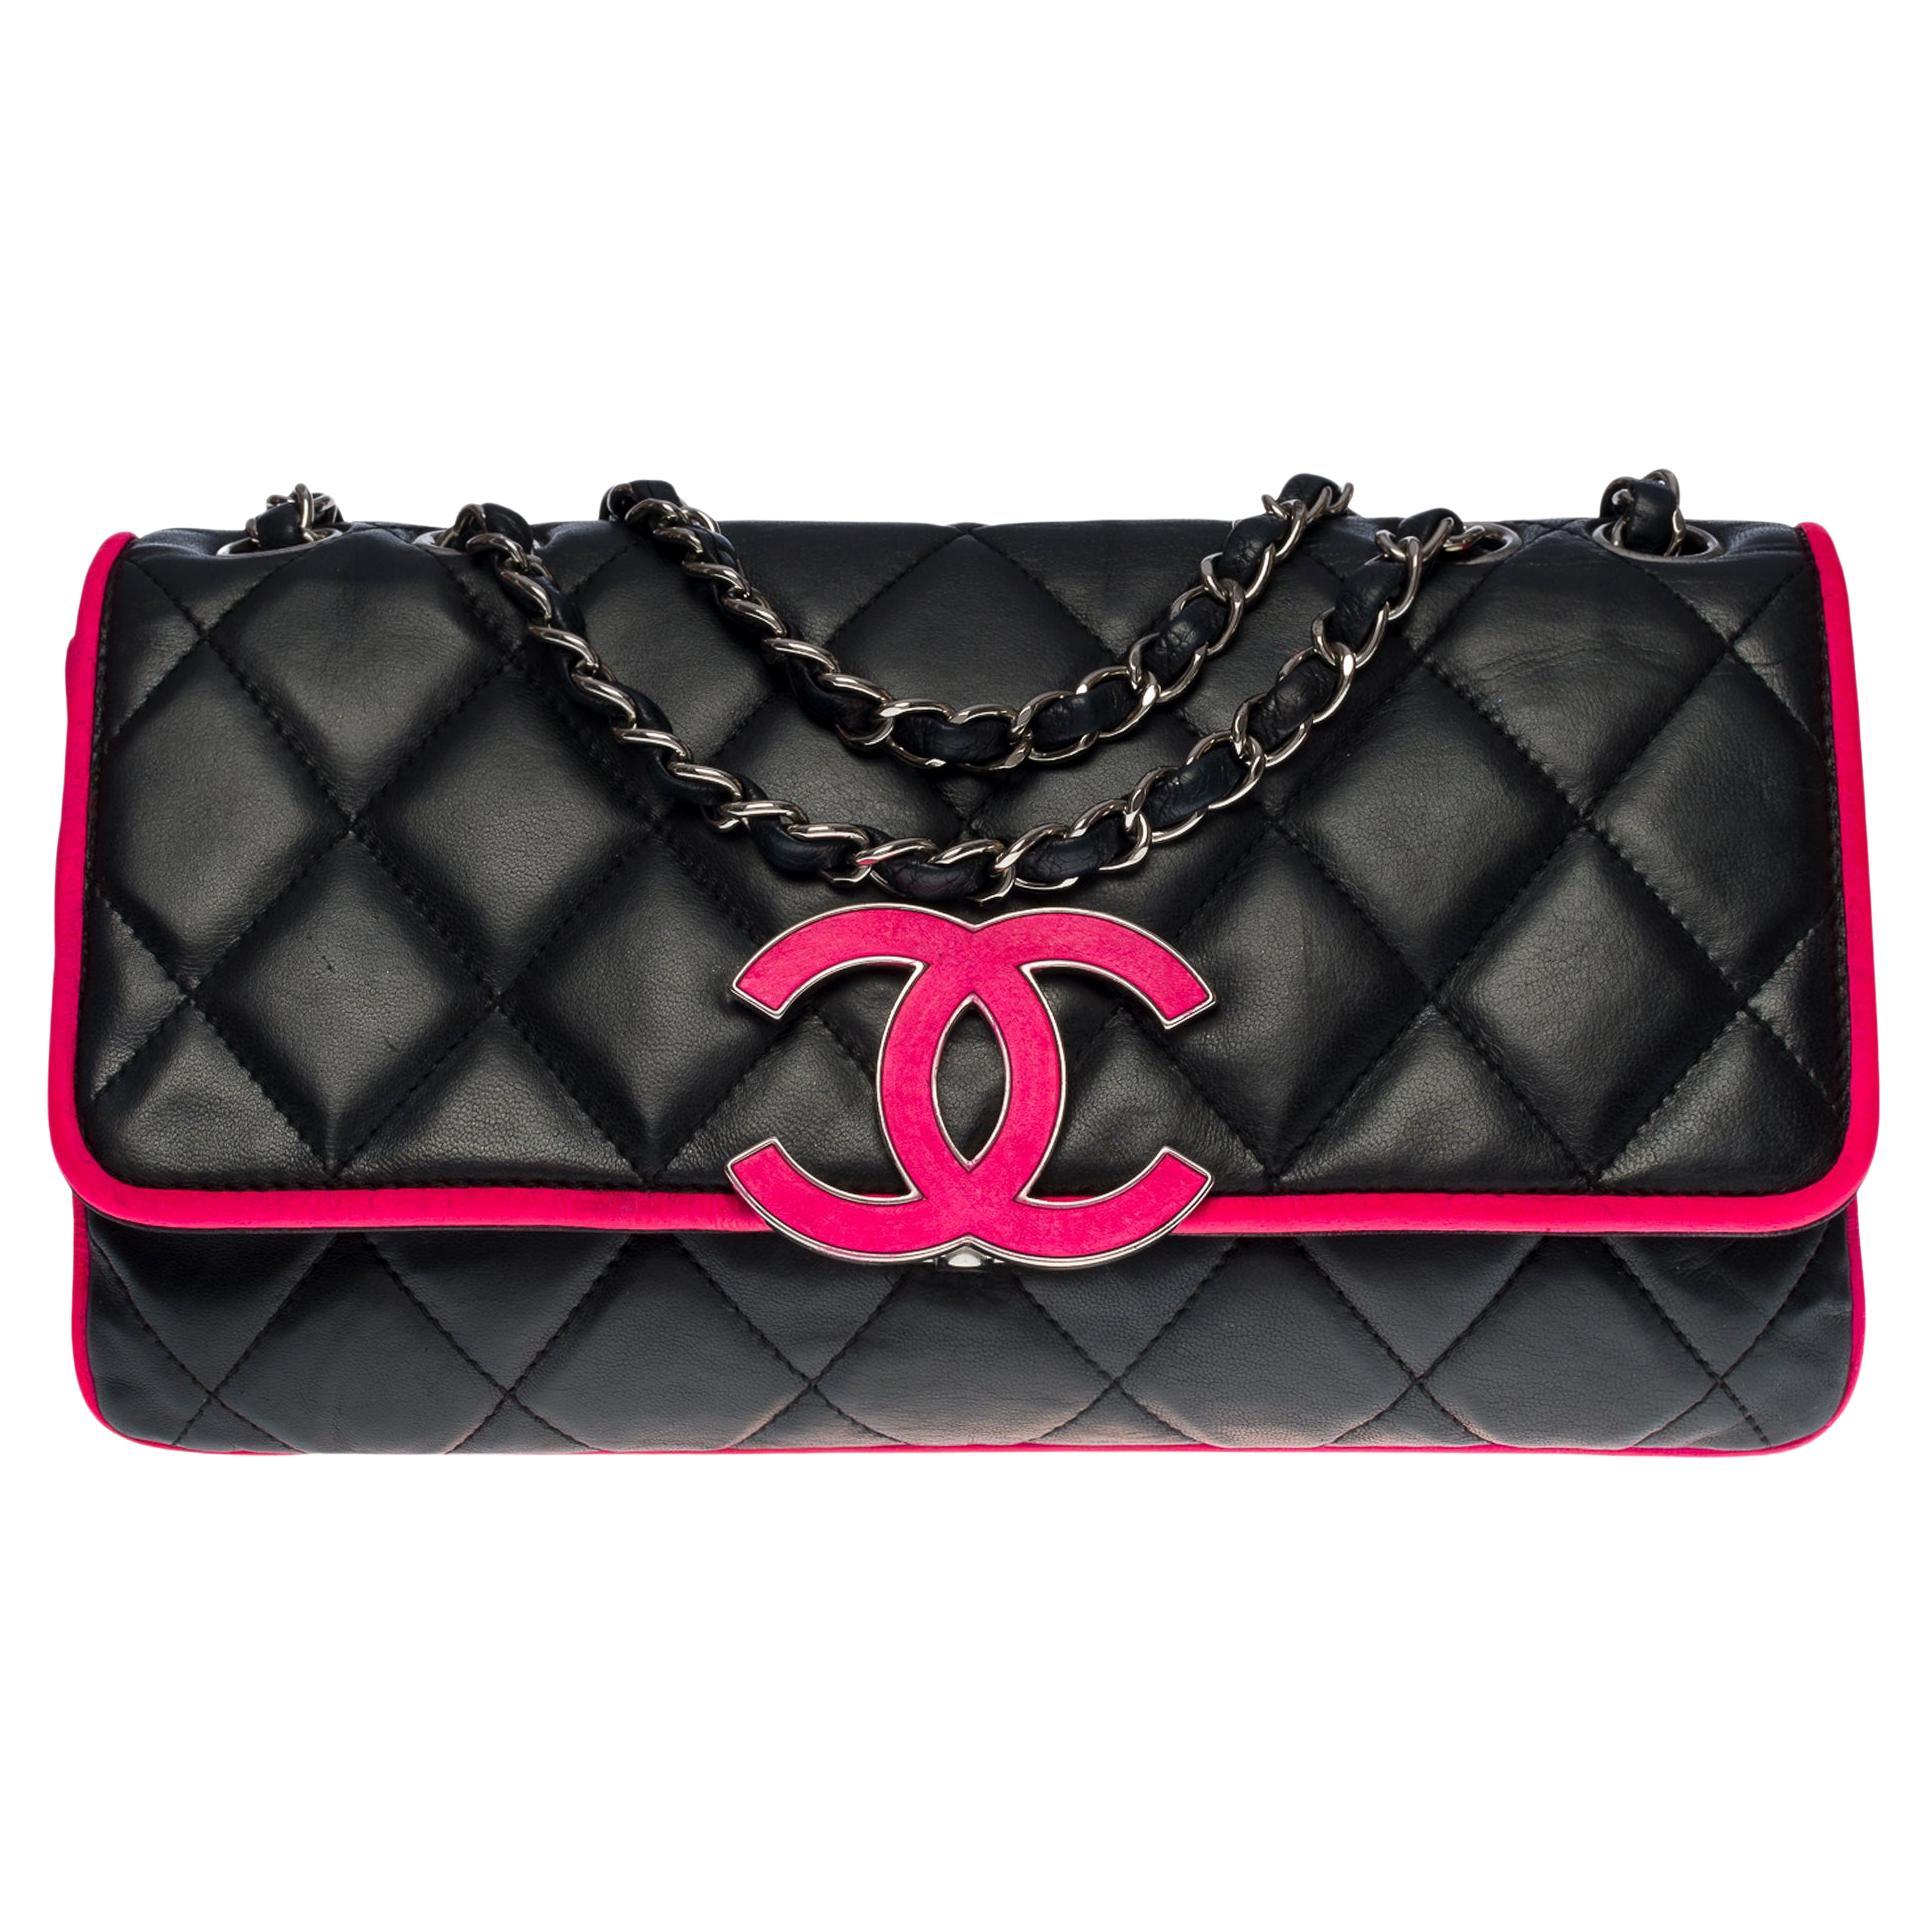 Chanel Classique flap shoulder bag in black and neon pink leather, SHW at  1stDibs